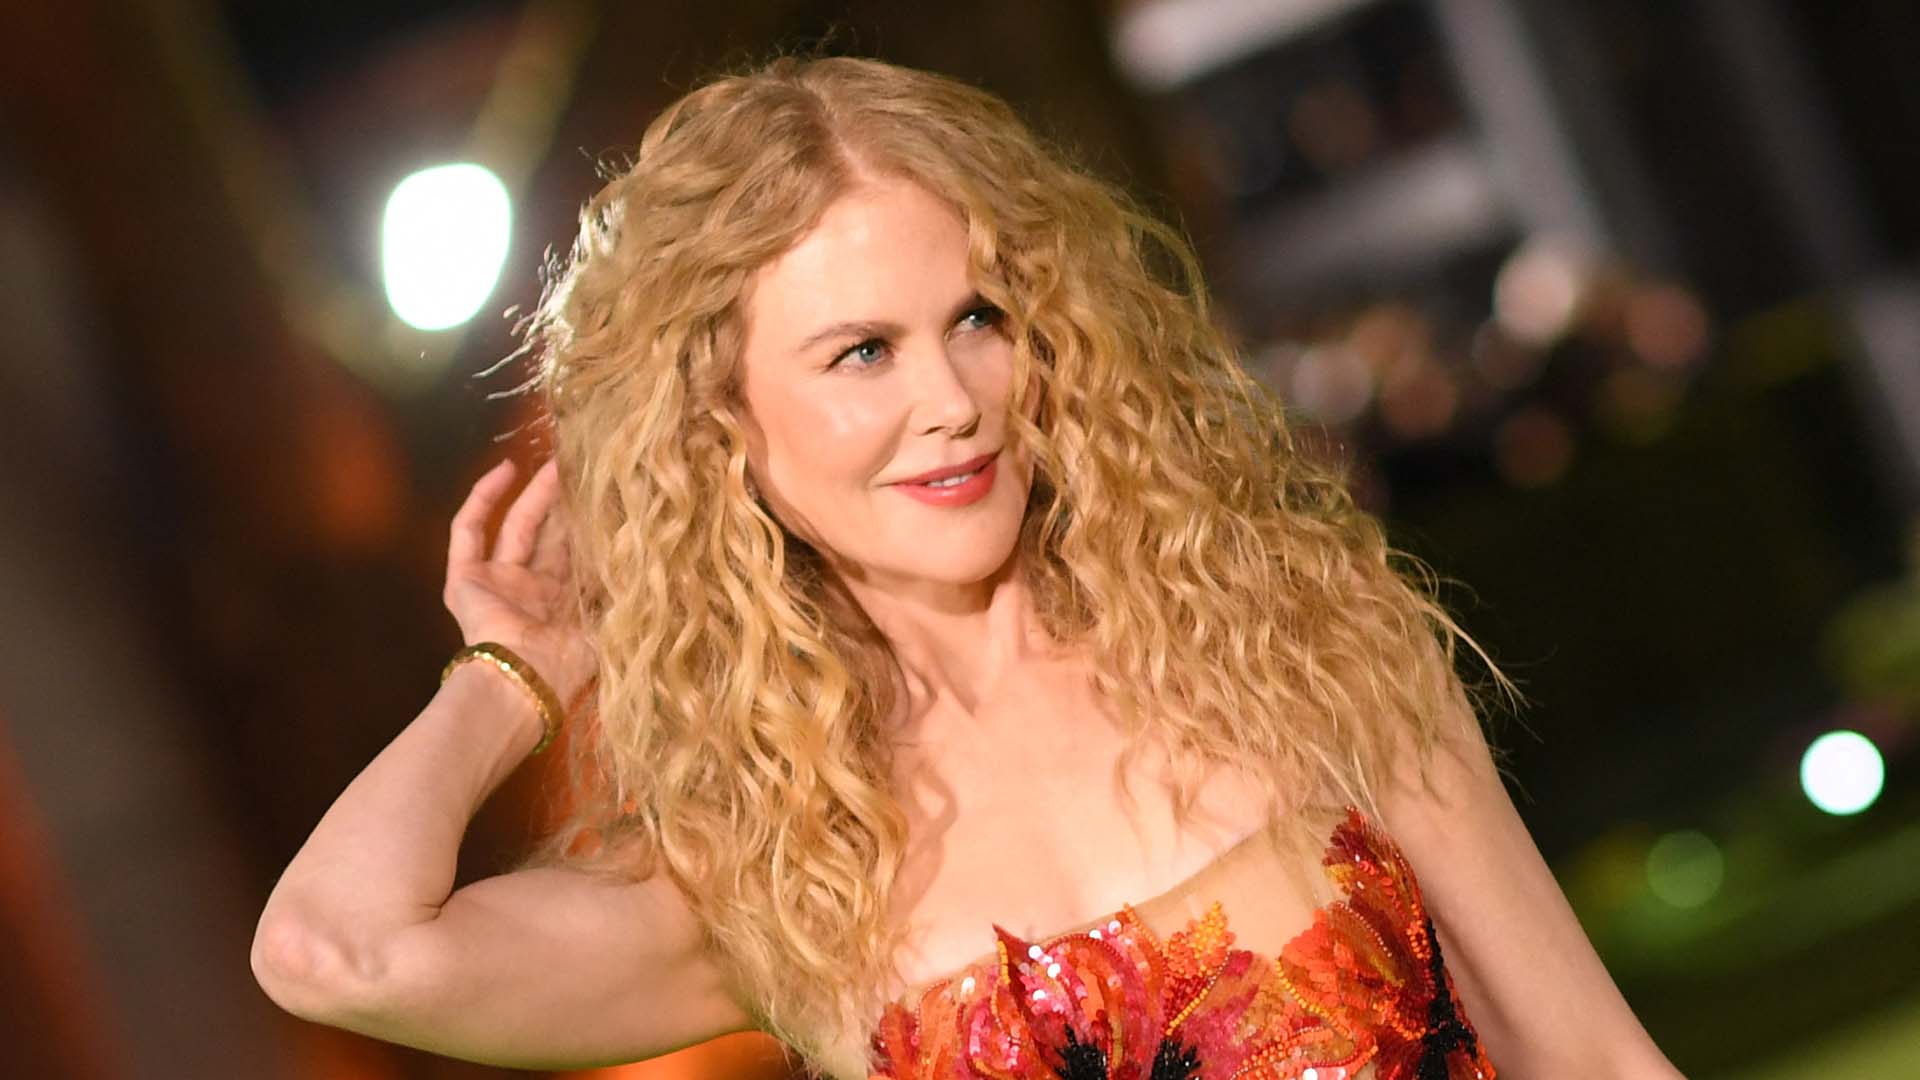 WATCH: Nicole Kidman Stars as Lucille Ball in ‘Being the Ricardos’ Trailer 